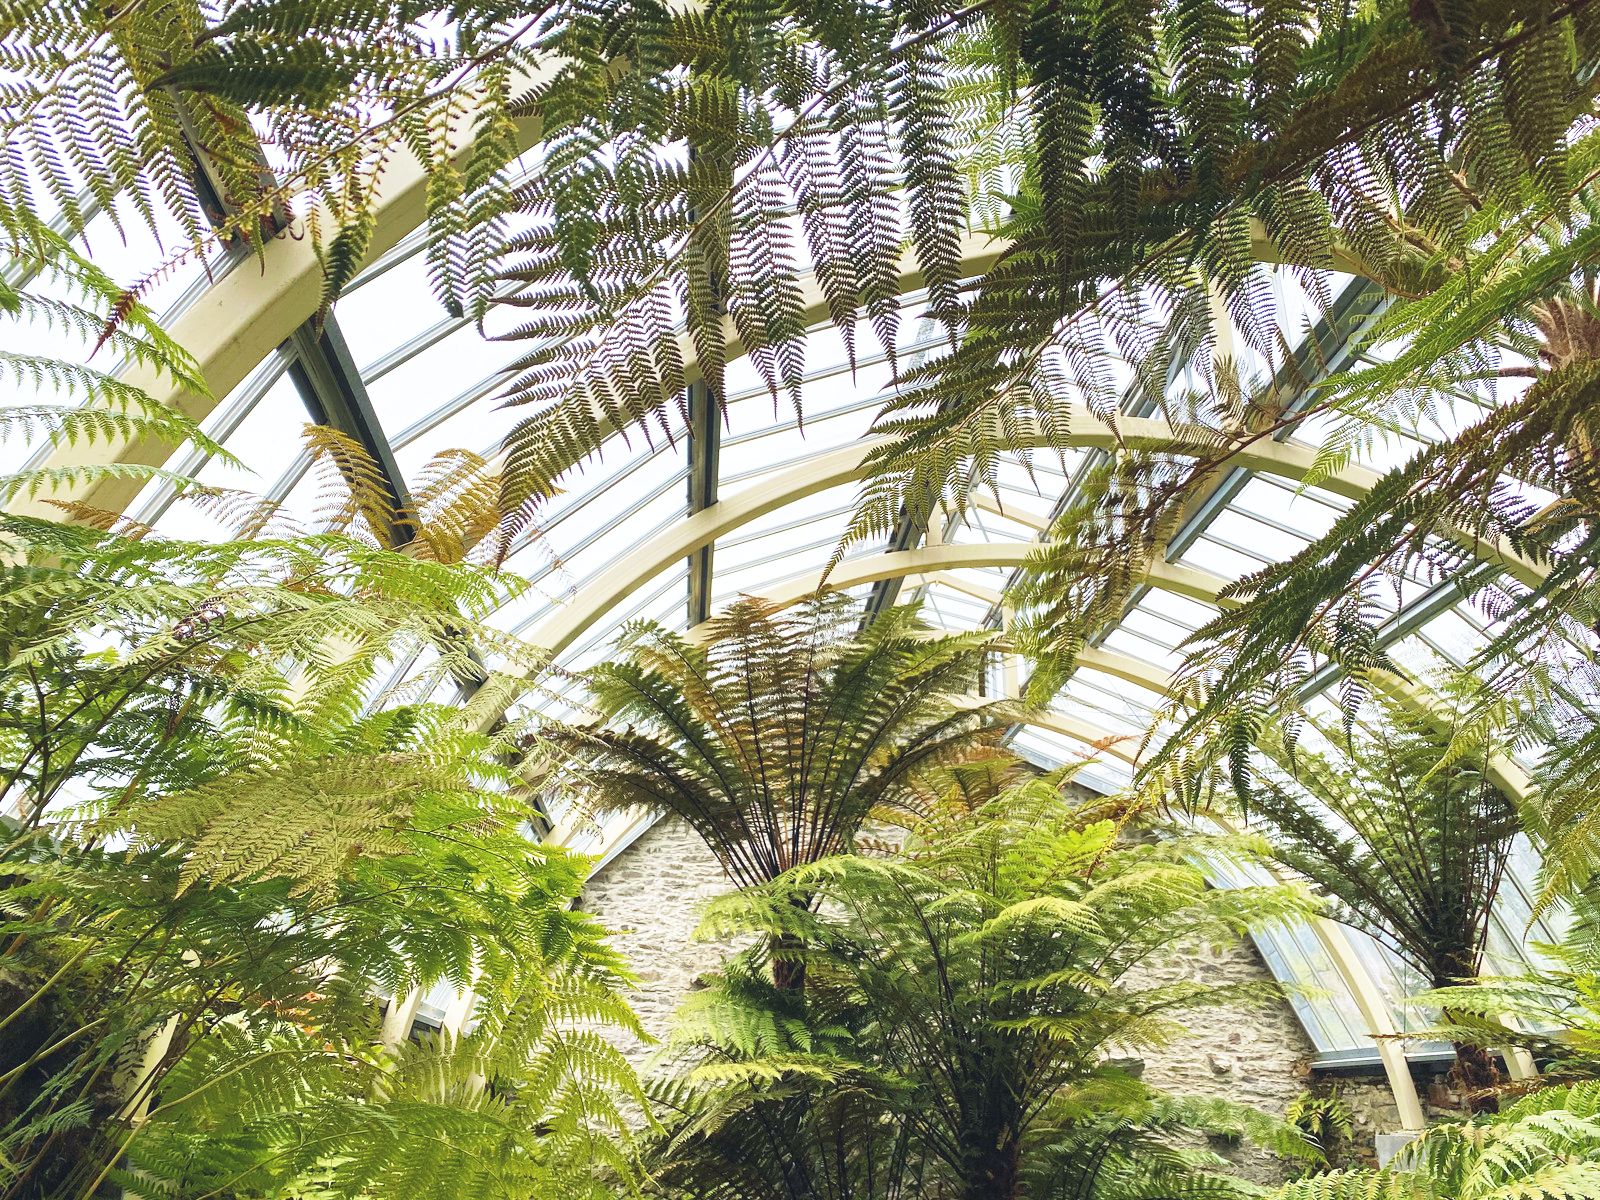 A photo of inside a domed glasshouse, which is filled with tall green tree ferns